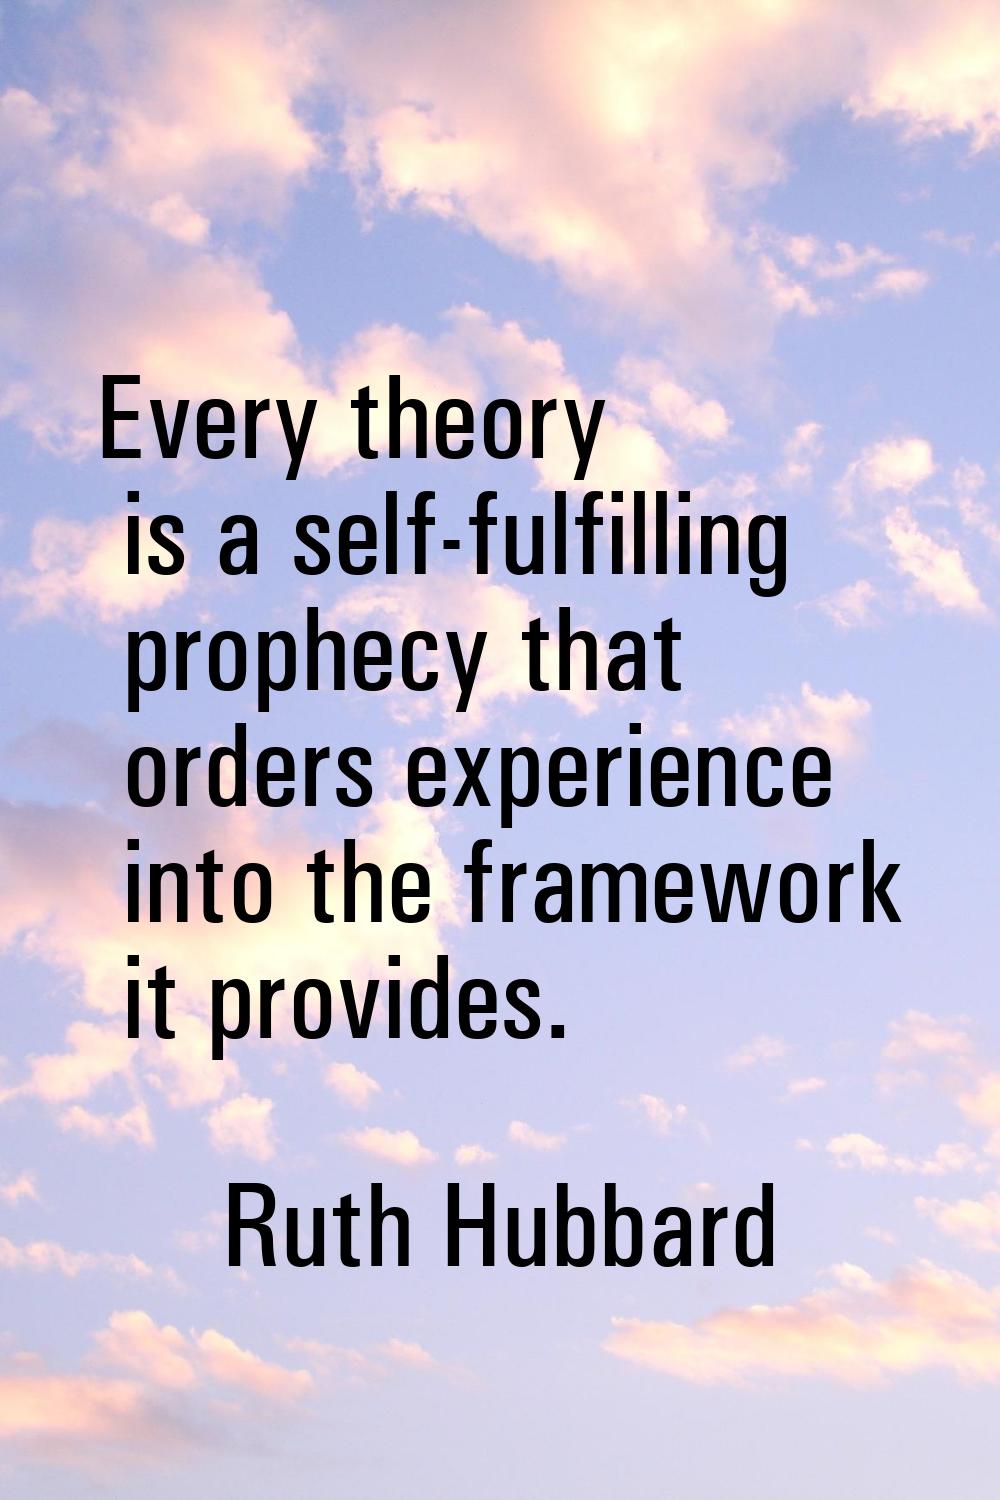 Every theory is a self-fulfilling prophecy that orders experience into the framework it provides.